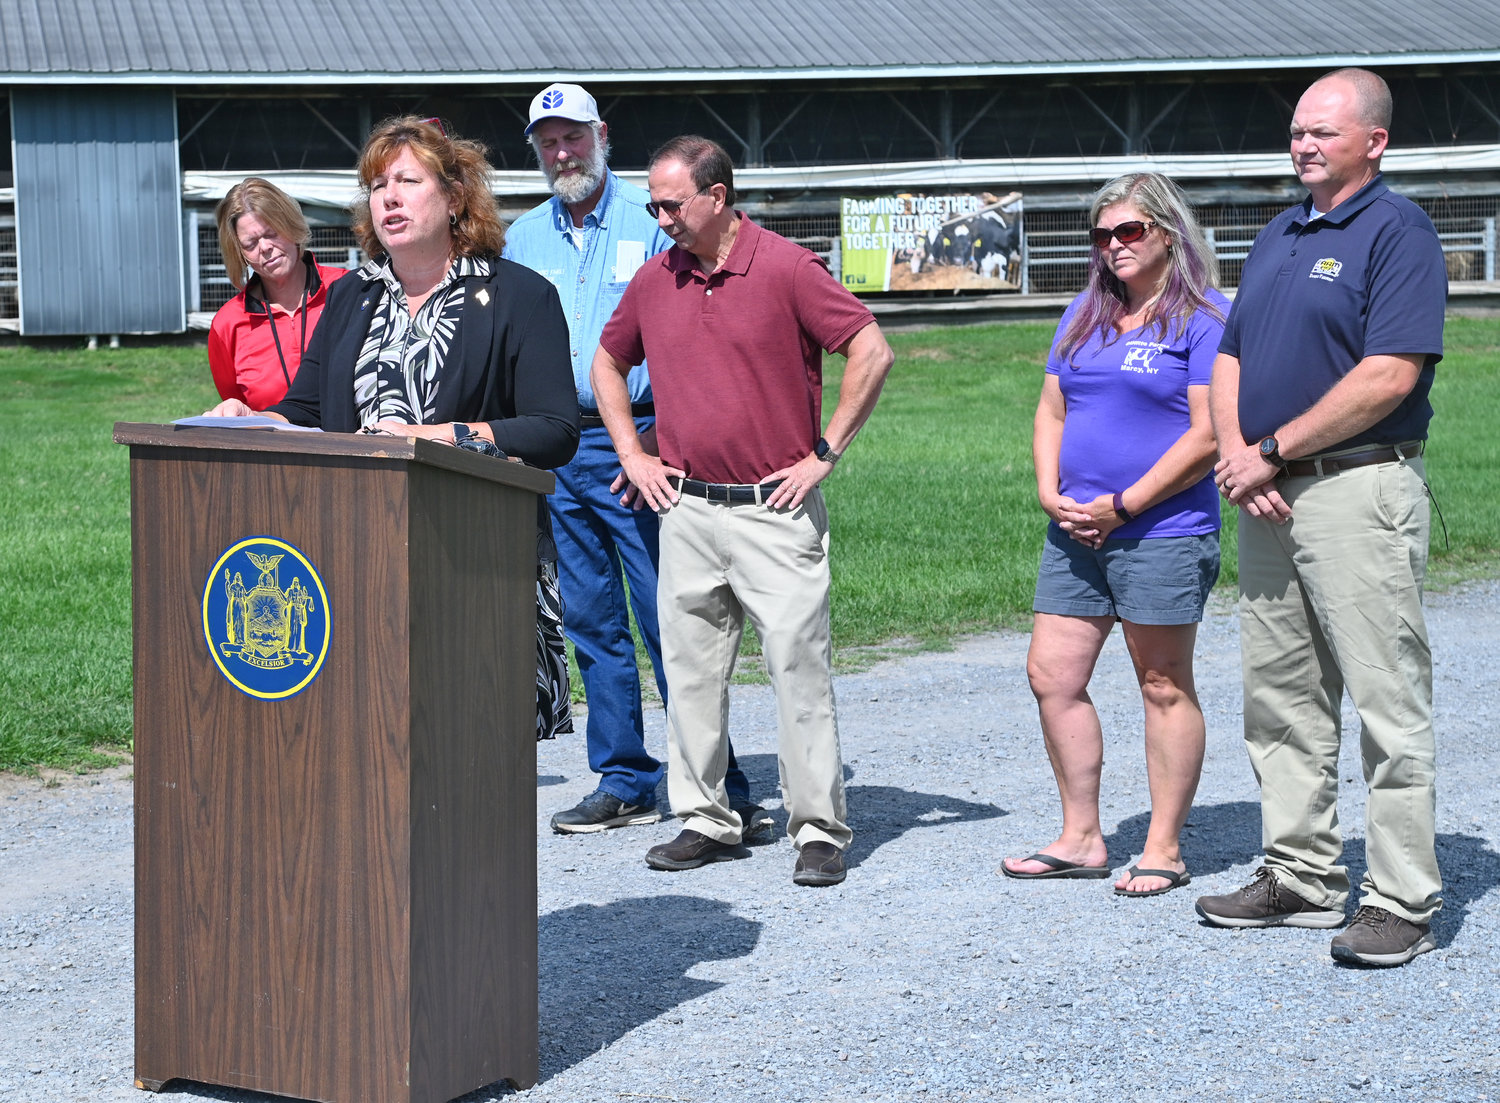 Assemblywoman Marianne Buttenschon, D-119, Marcy, state Sen. Joseph A. Griffo, R-47, Rome, are joined by several local farmers during a press conference discussing a proposed reduction in the farmworker overtime threshold during a press conference on Thursday at DiNitto’s Farm on Benton Road in Marcy on Thursday.